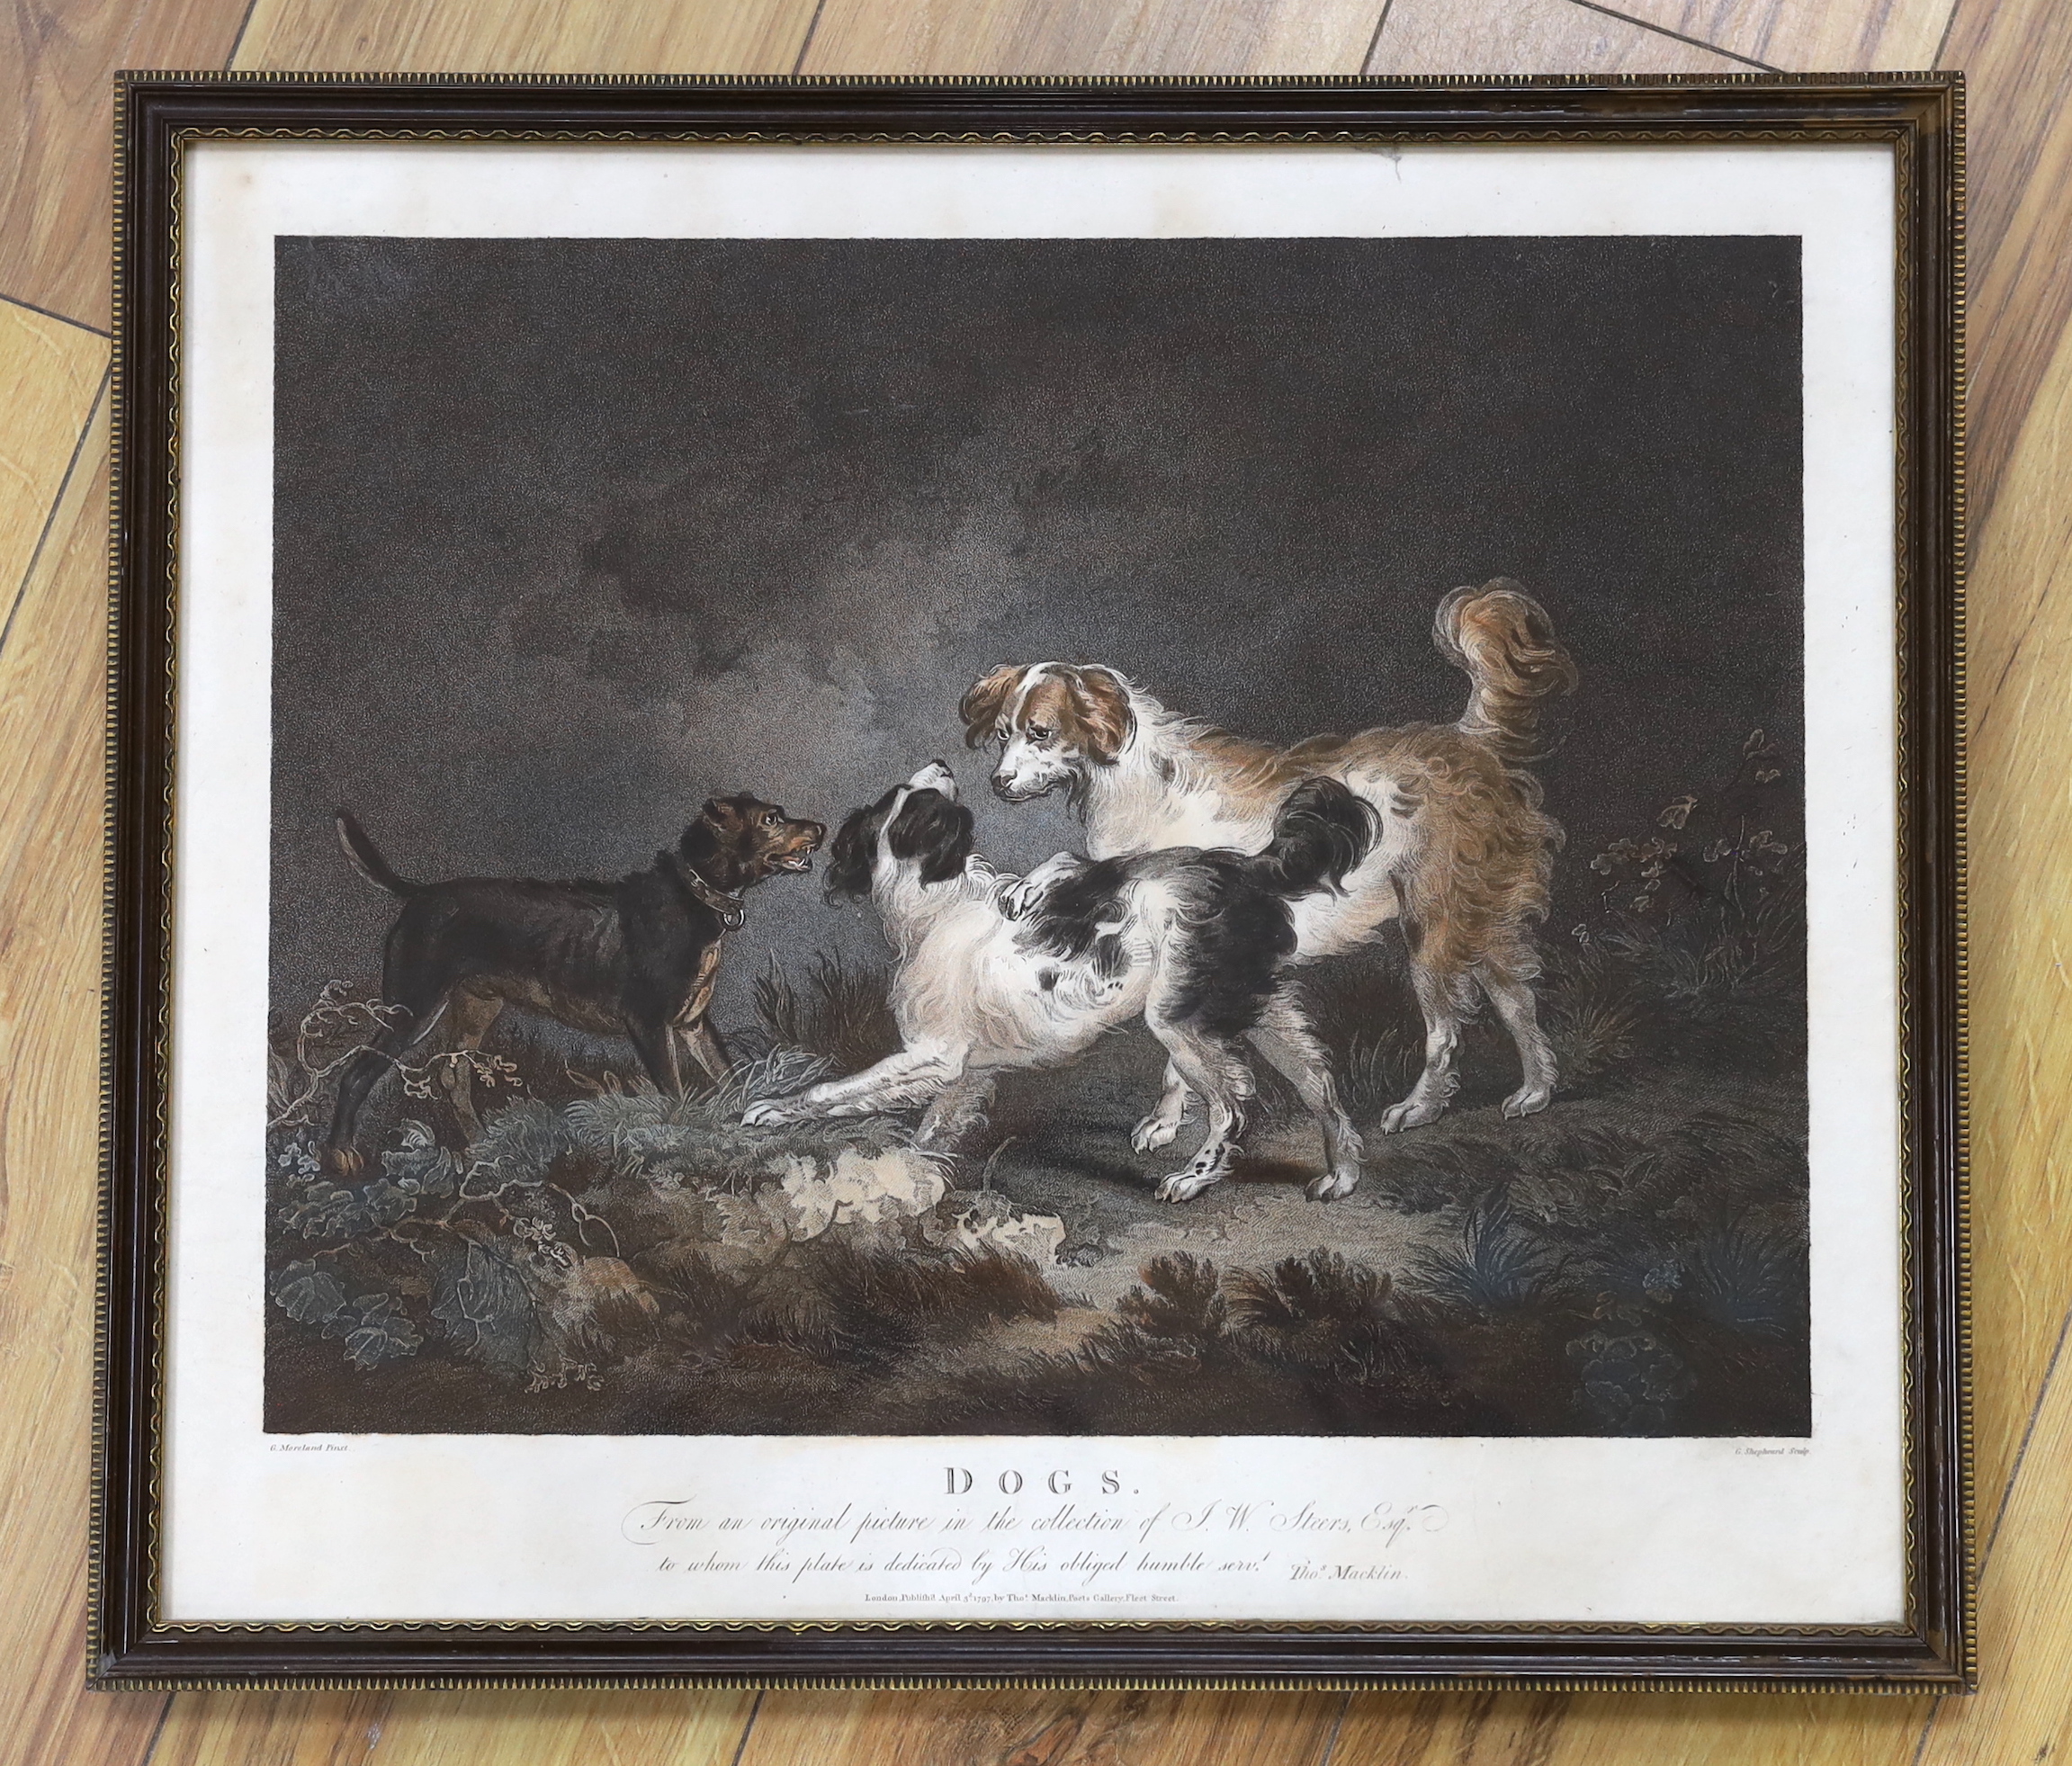 After George Morland (1763-1804), colour engraving, 'Dogs', publ. London 3rd April 1797 by Thomas Macklin, Poets Gallery, Fleet Street, 43 x 49cm